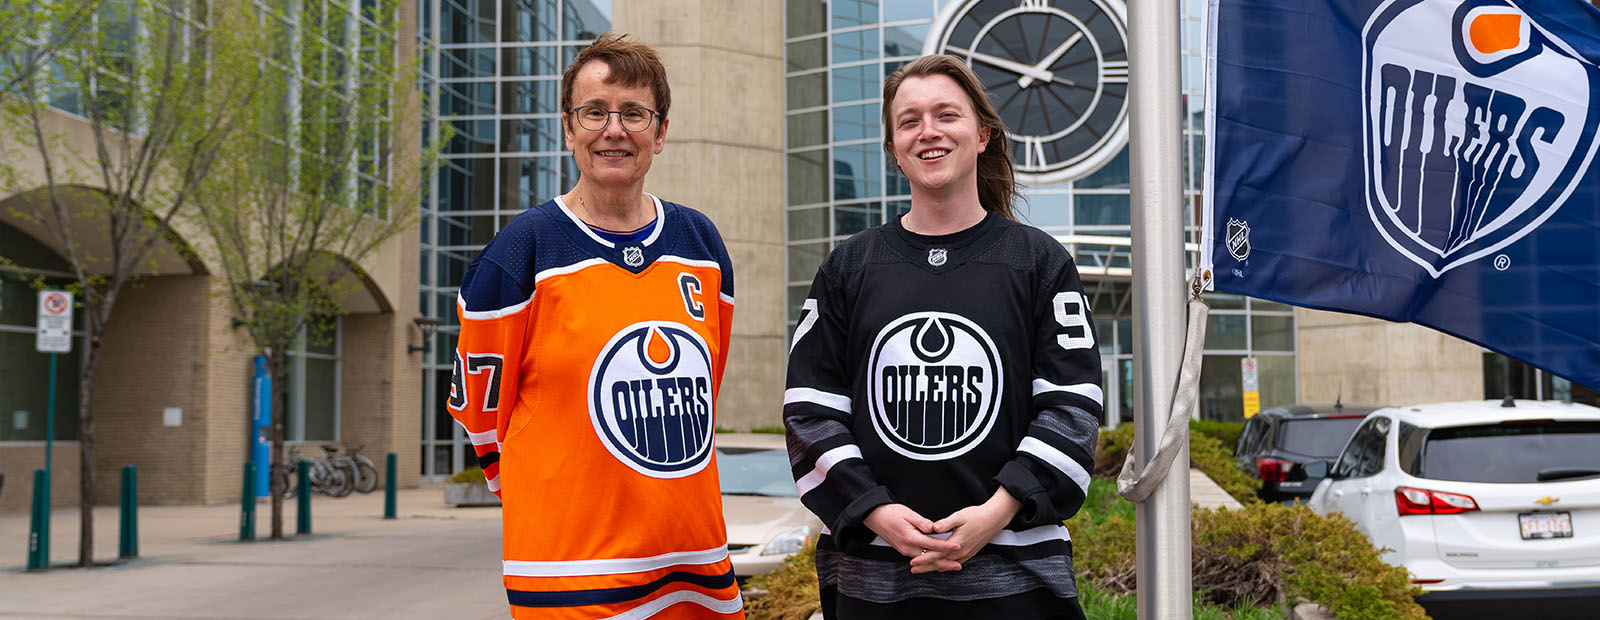 MacEwan University president and vice-chancellor, Dr. Annette Trimbee raising a Oilers flag outside Building 6